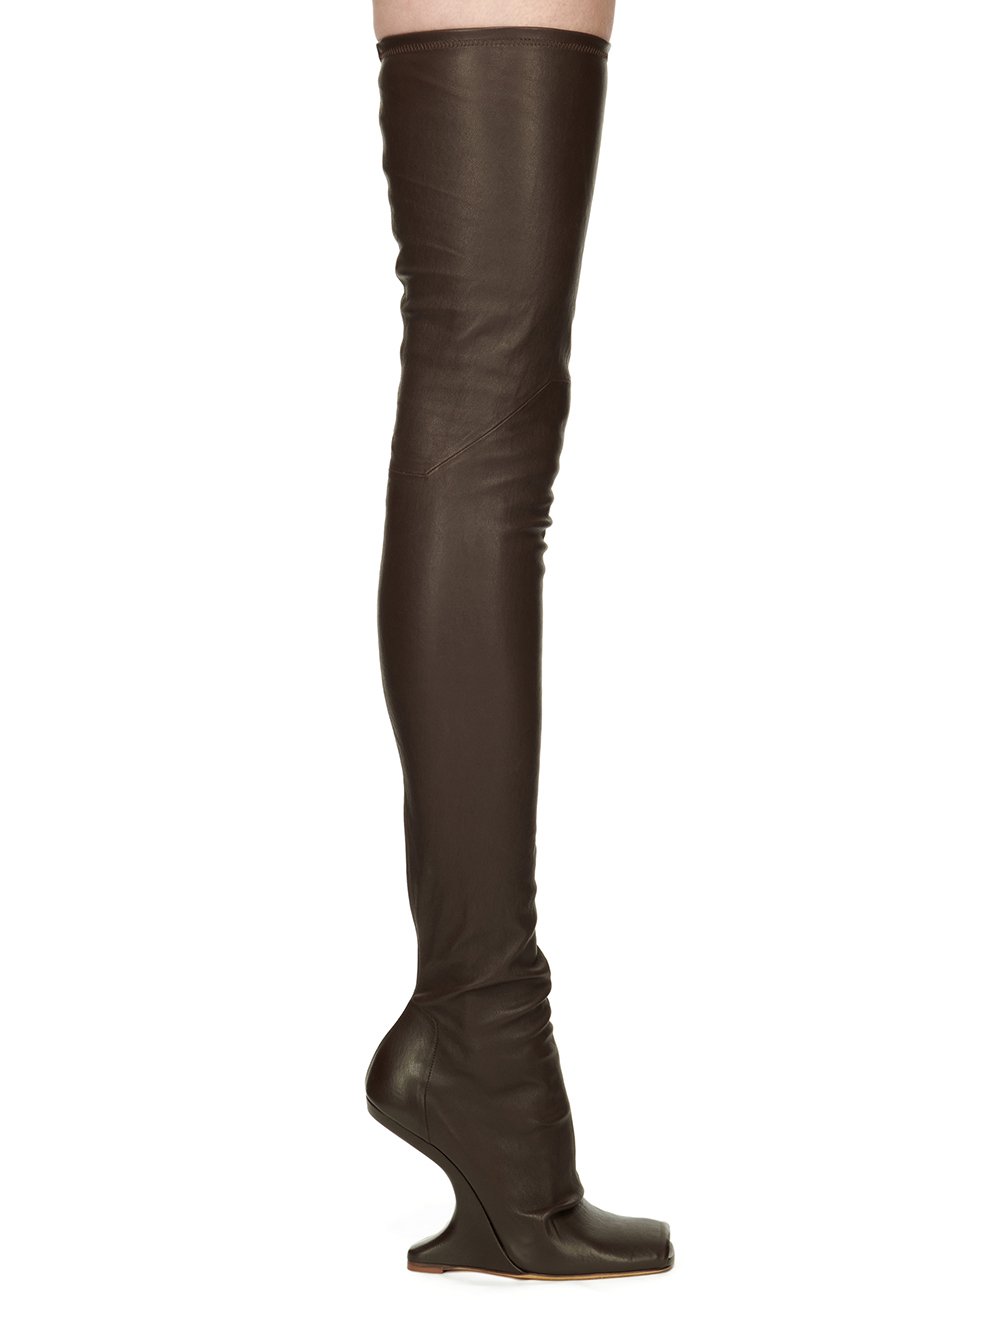 RICK OWENS FW23 LUXOR CANTILEVER 11 THIGH HIGH IN BROWN STRETCH LAMB LEATHER